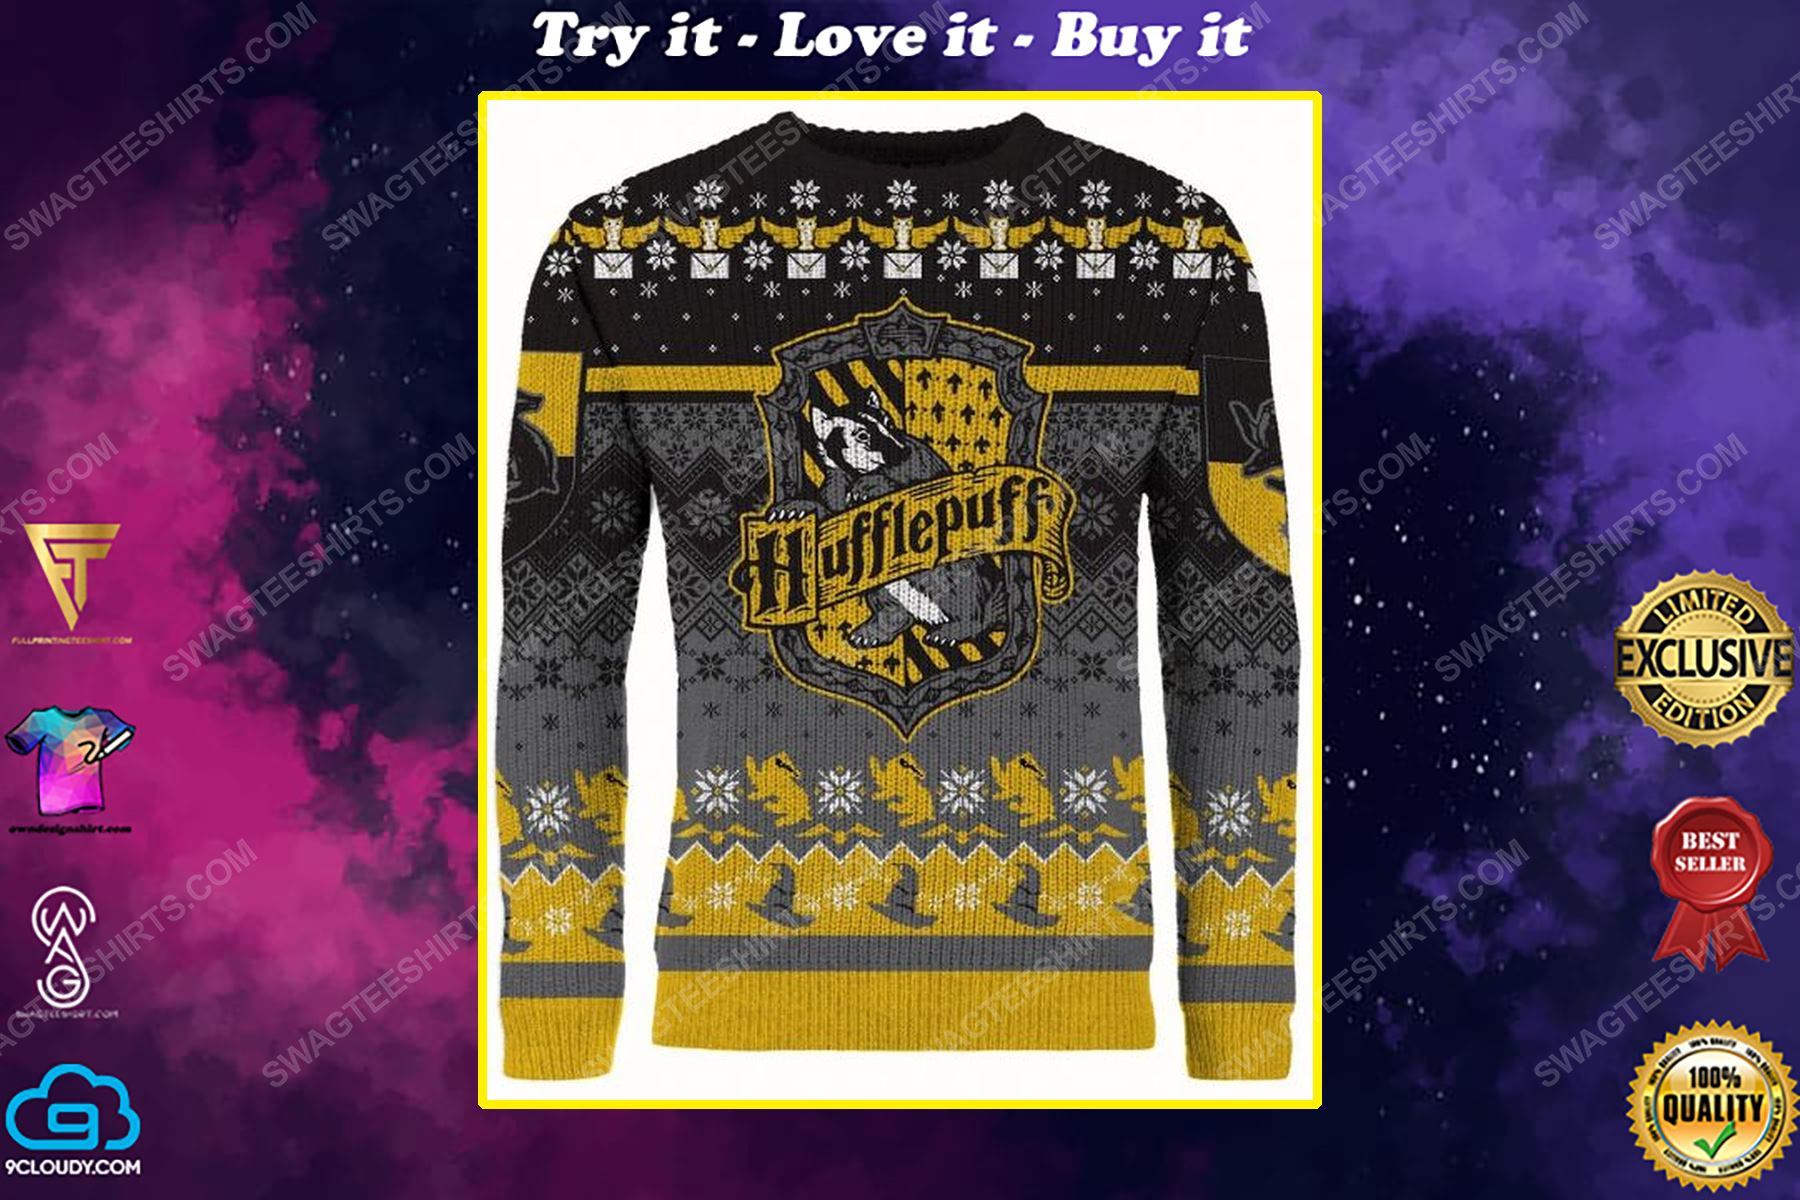 The hufflepuff harry potter full print ugly christmas sweater